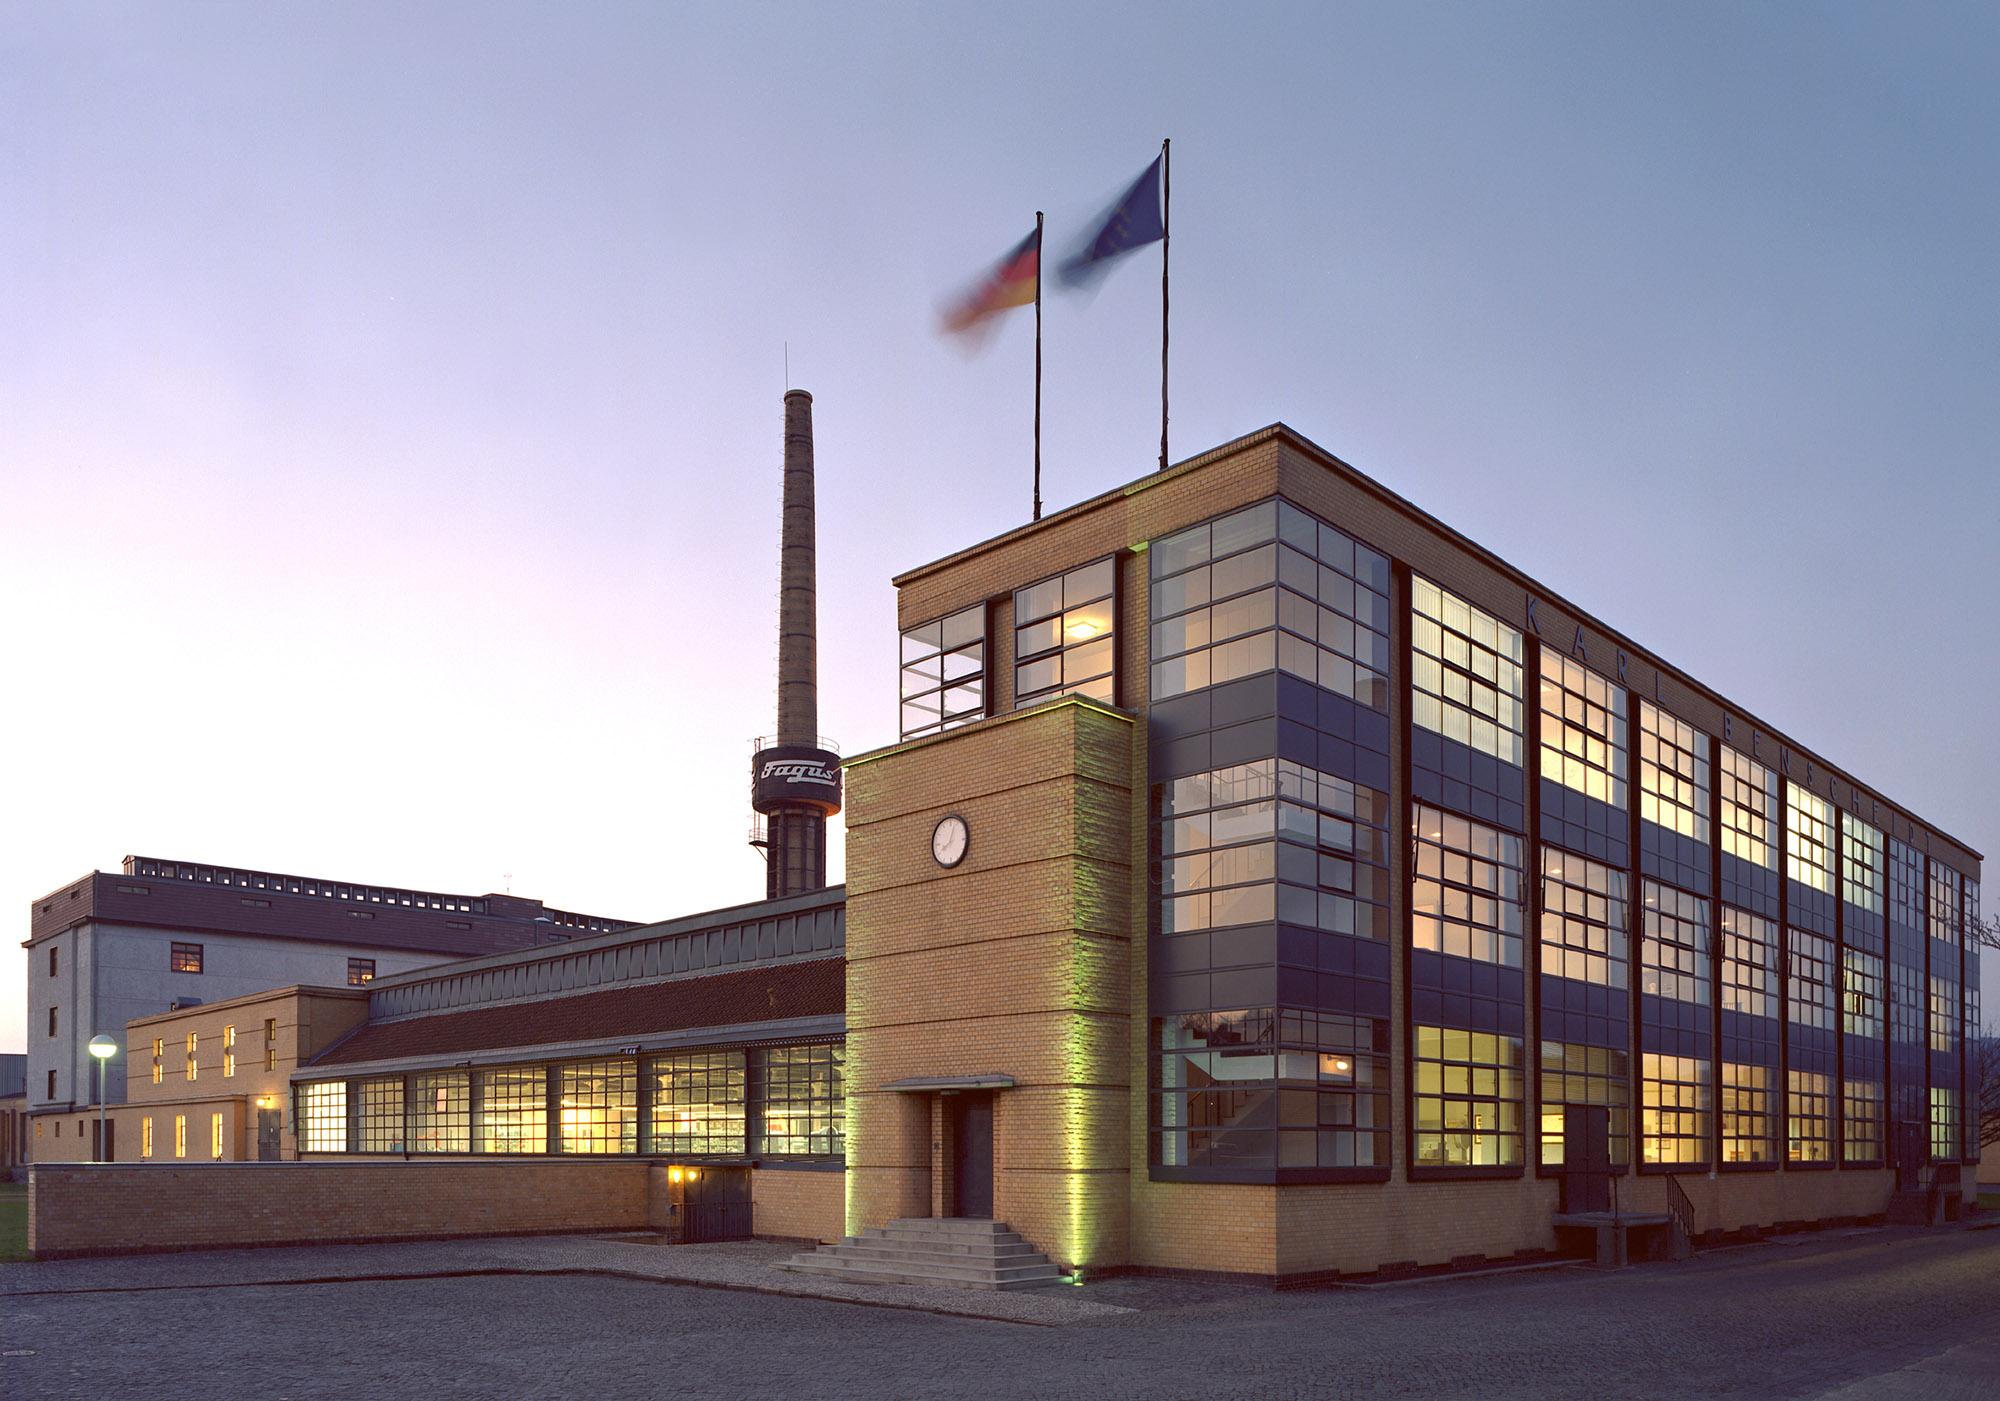 The UNESCO World Heritage Site Fagus factory was built by the Bauhaus founder Walter Gropius in 1911 and is considered the first building of the modern era. – © UNESCO-Welterbe Fagus-Werk